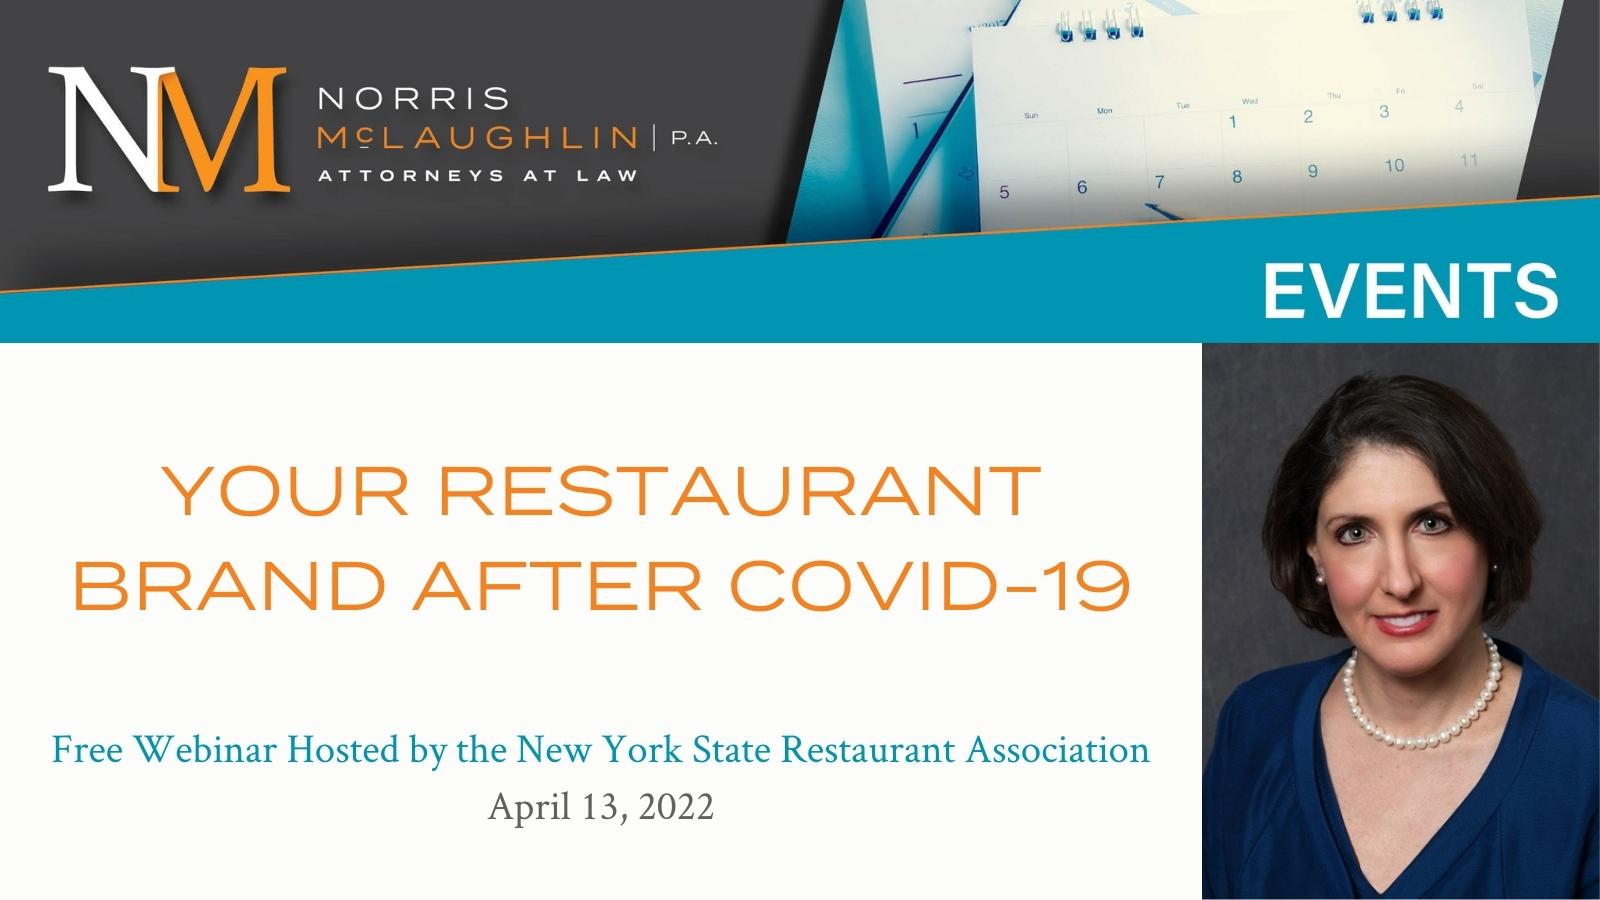 Your Restaurant Brand After COVID-19